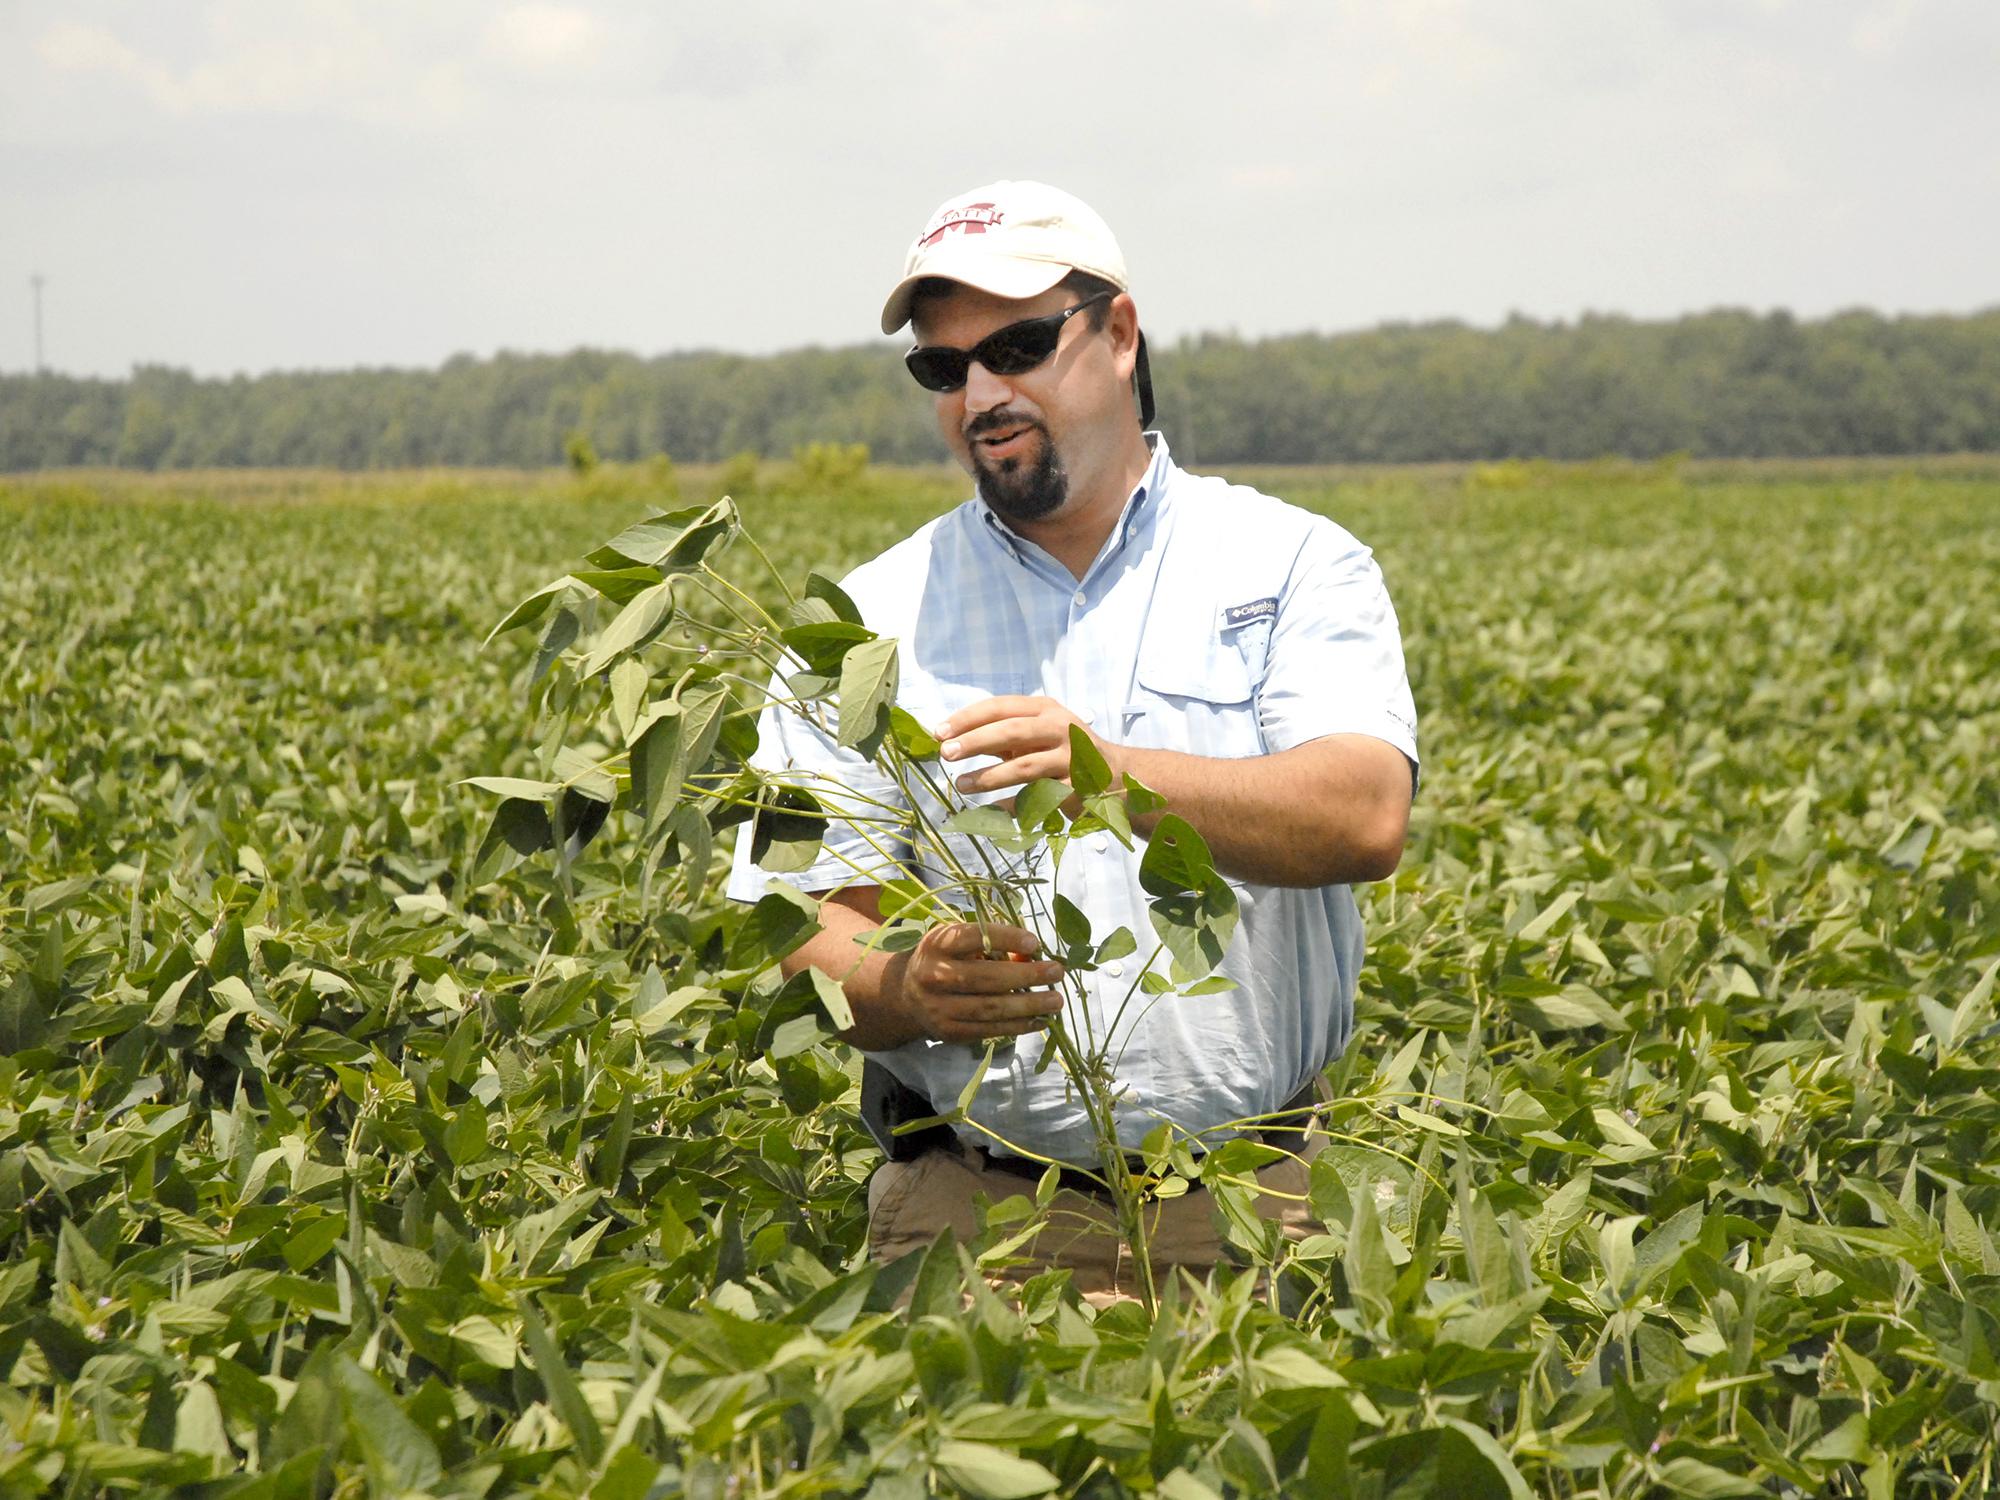 Trent Irby, soybean specialist with the Mississippi State University Extension Service, evaluates the maturity of soybean plants on Aug. 2, 2013, in a research plot located at the R.R. Foil Plant Science Research Center in Starkville, Miss. (Photo by MSU Ag Communications/Linda Breazeale)